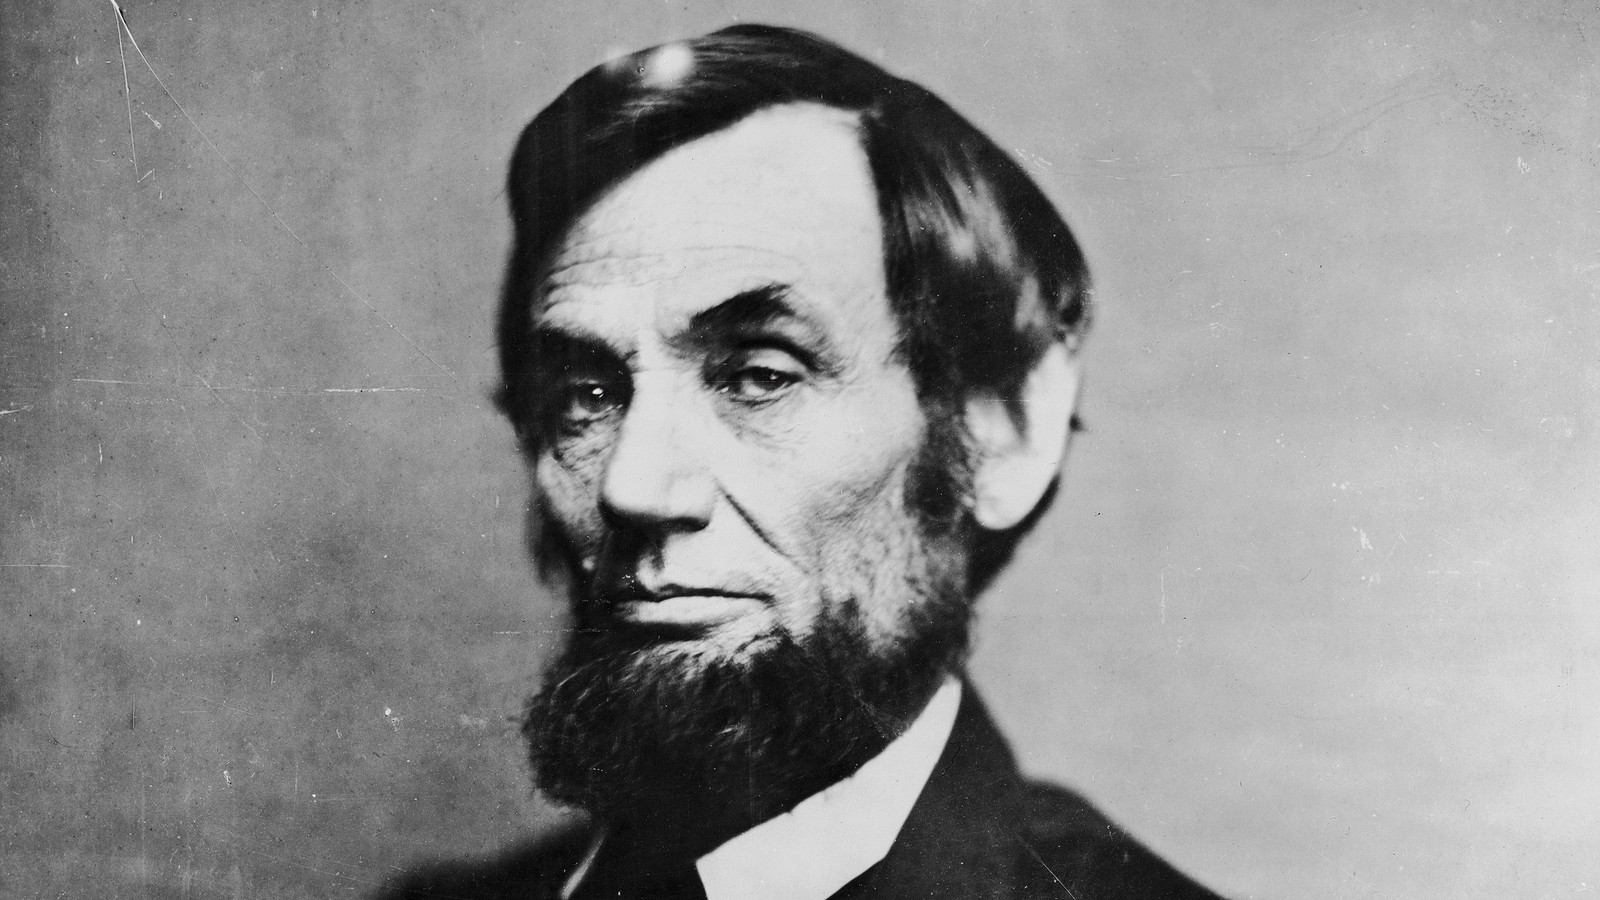 end of slavery abraham lincoln